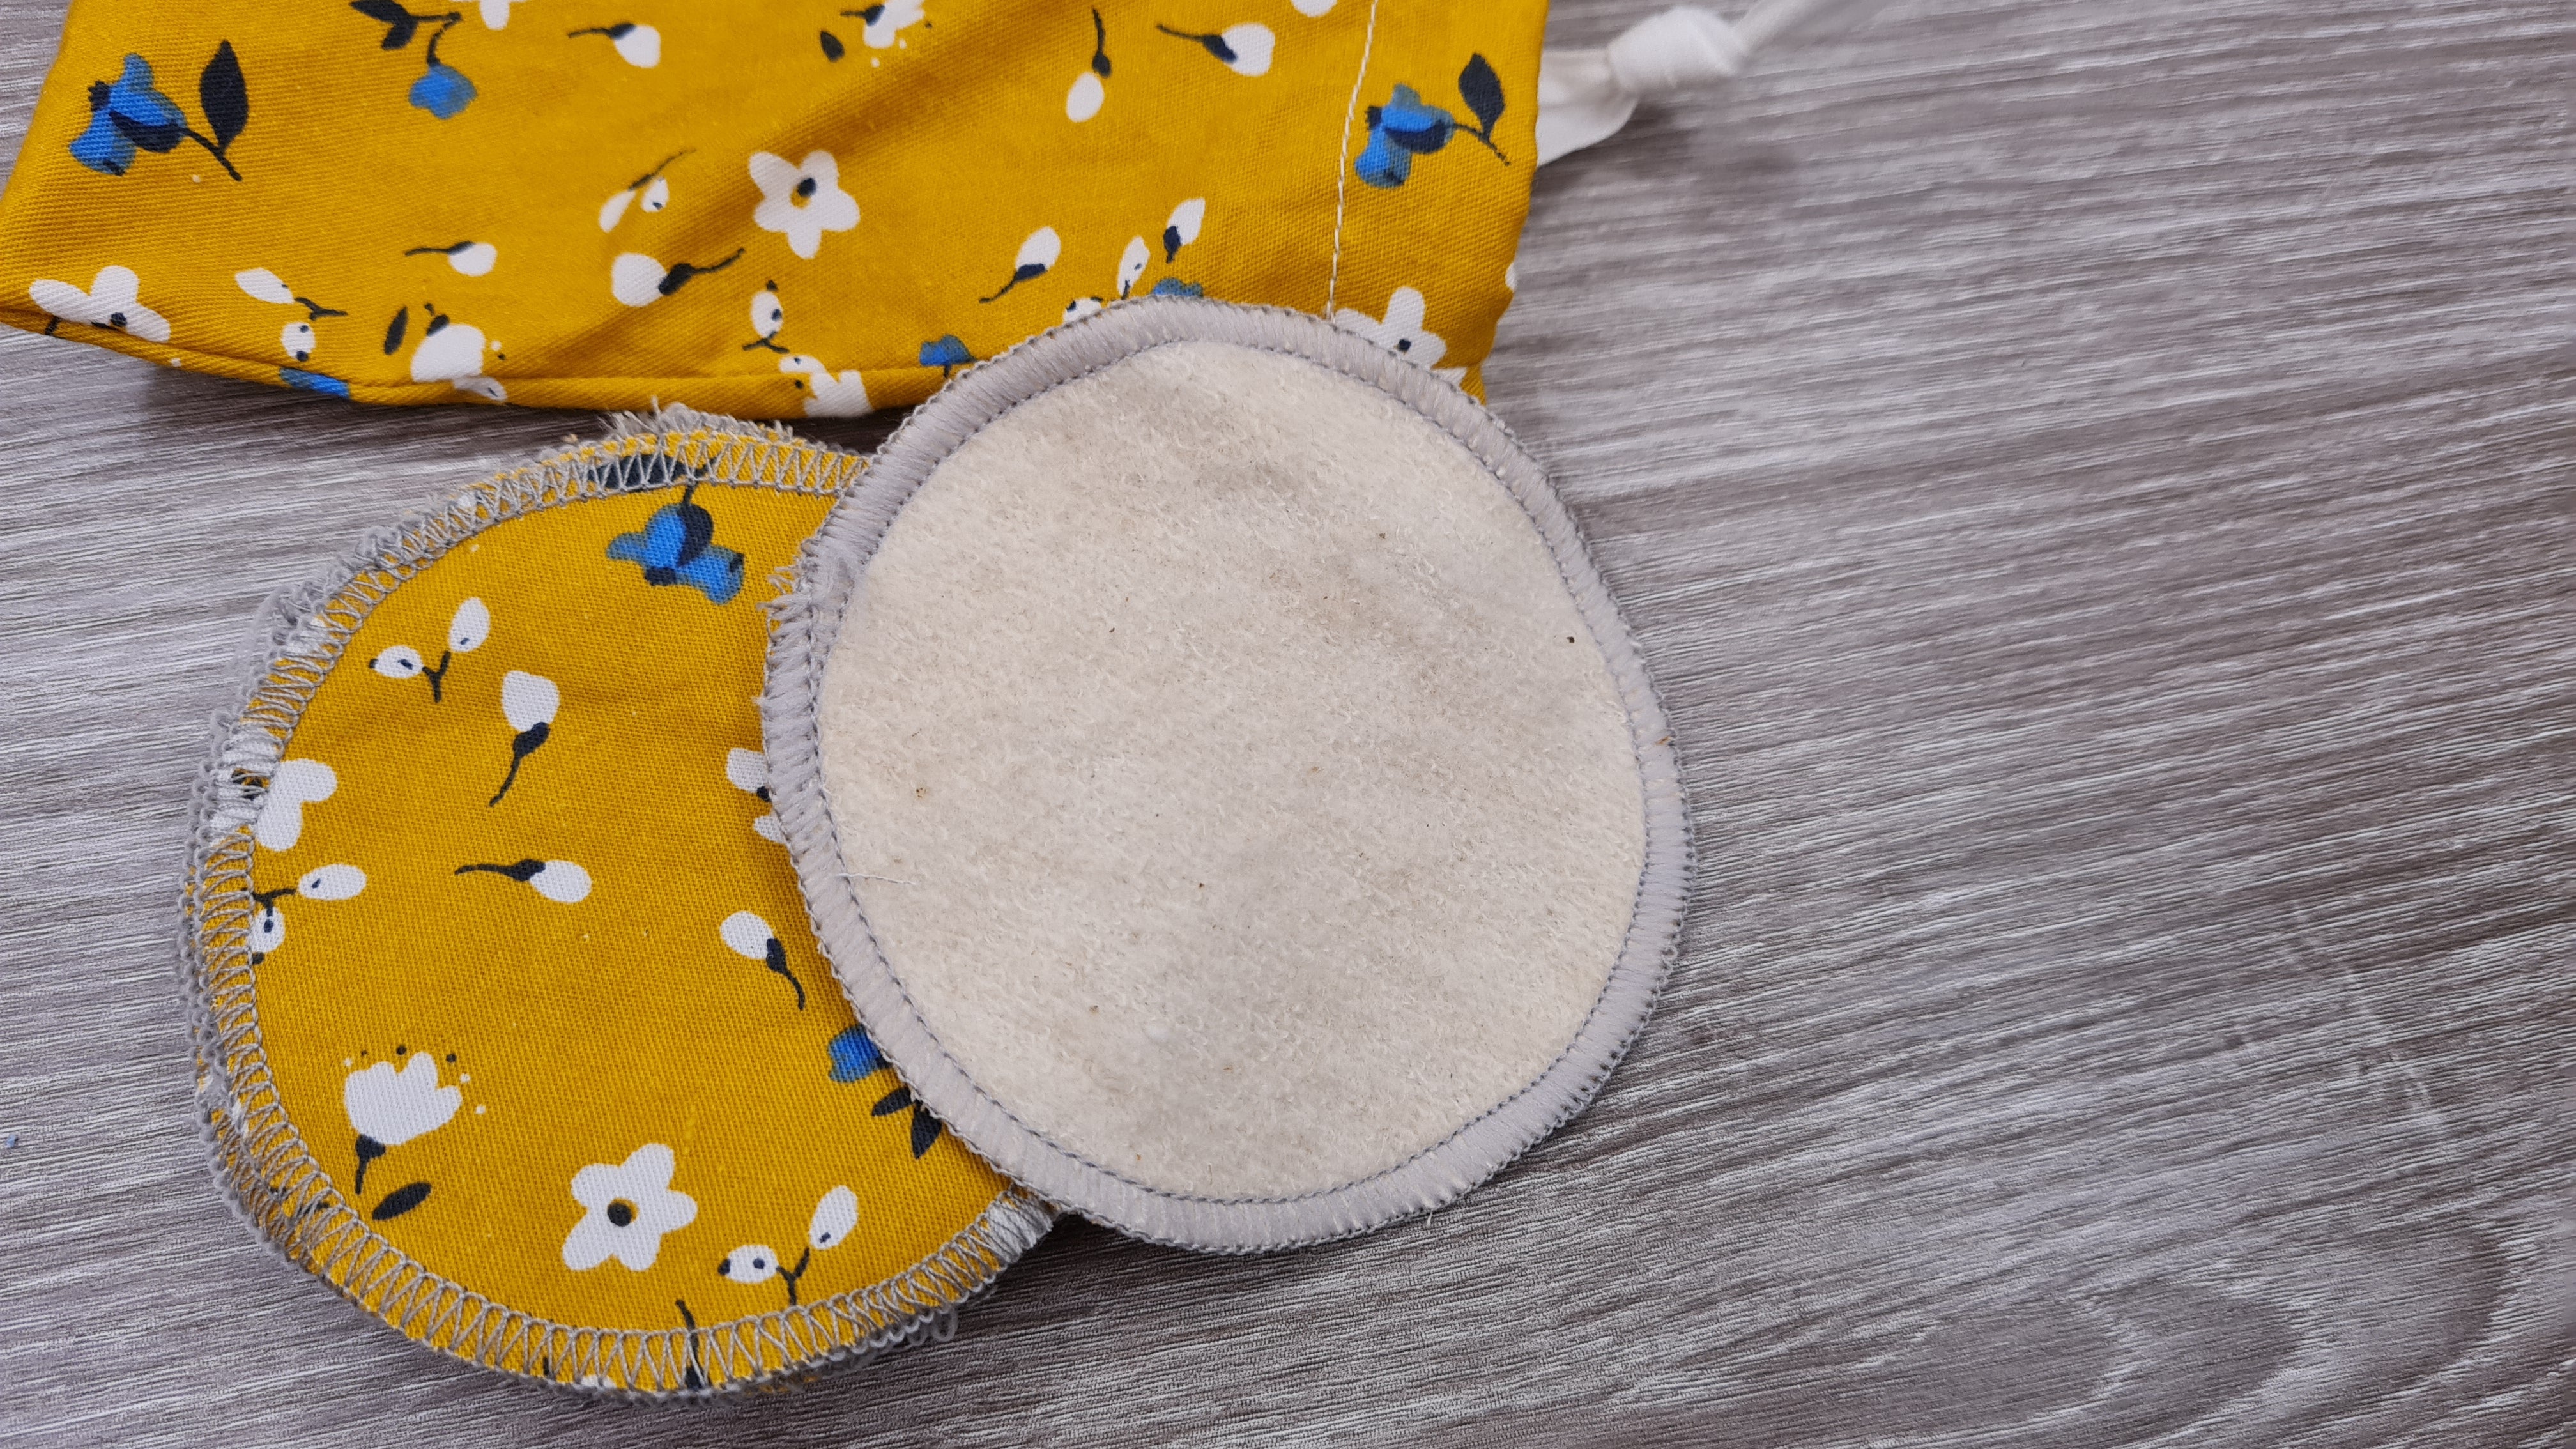 Lasting cotton pads, yellow flowers